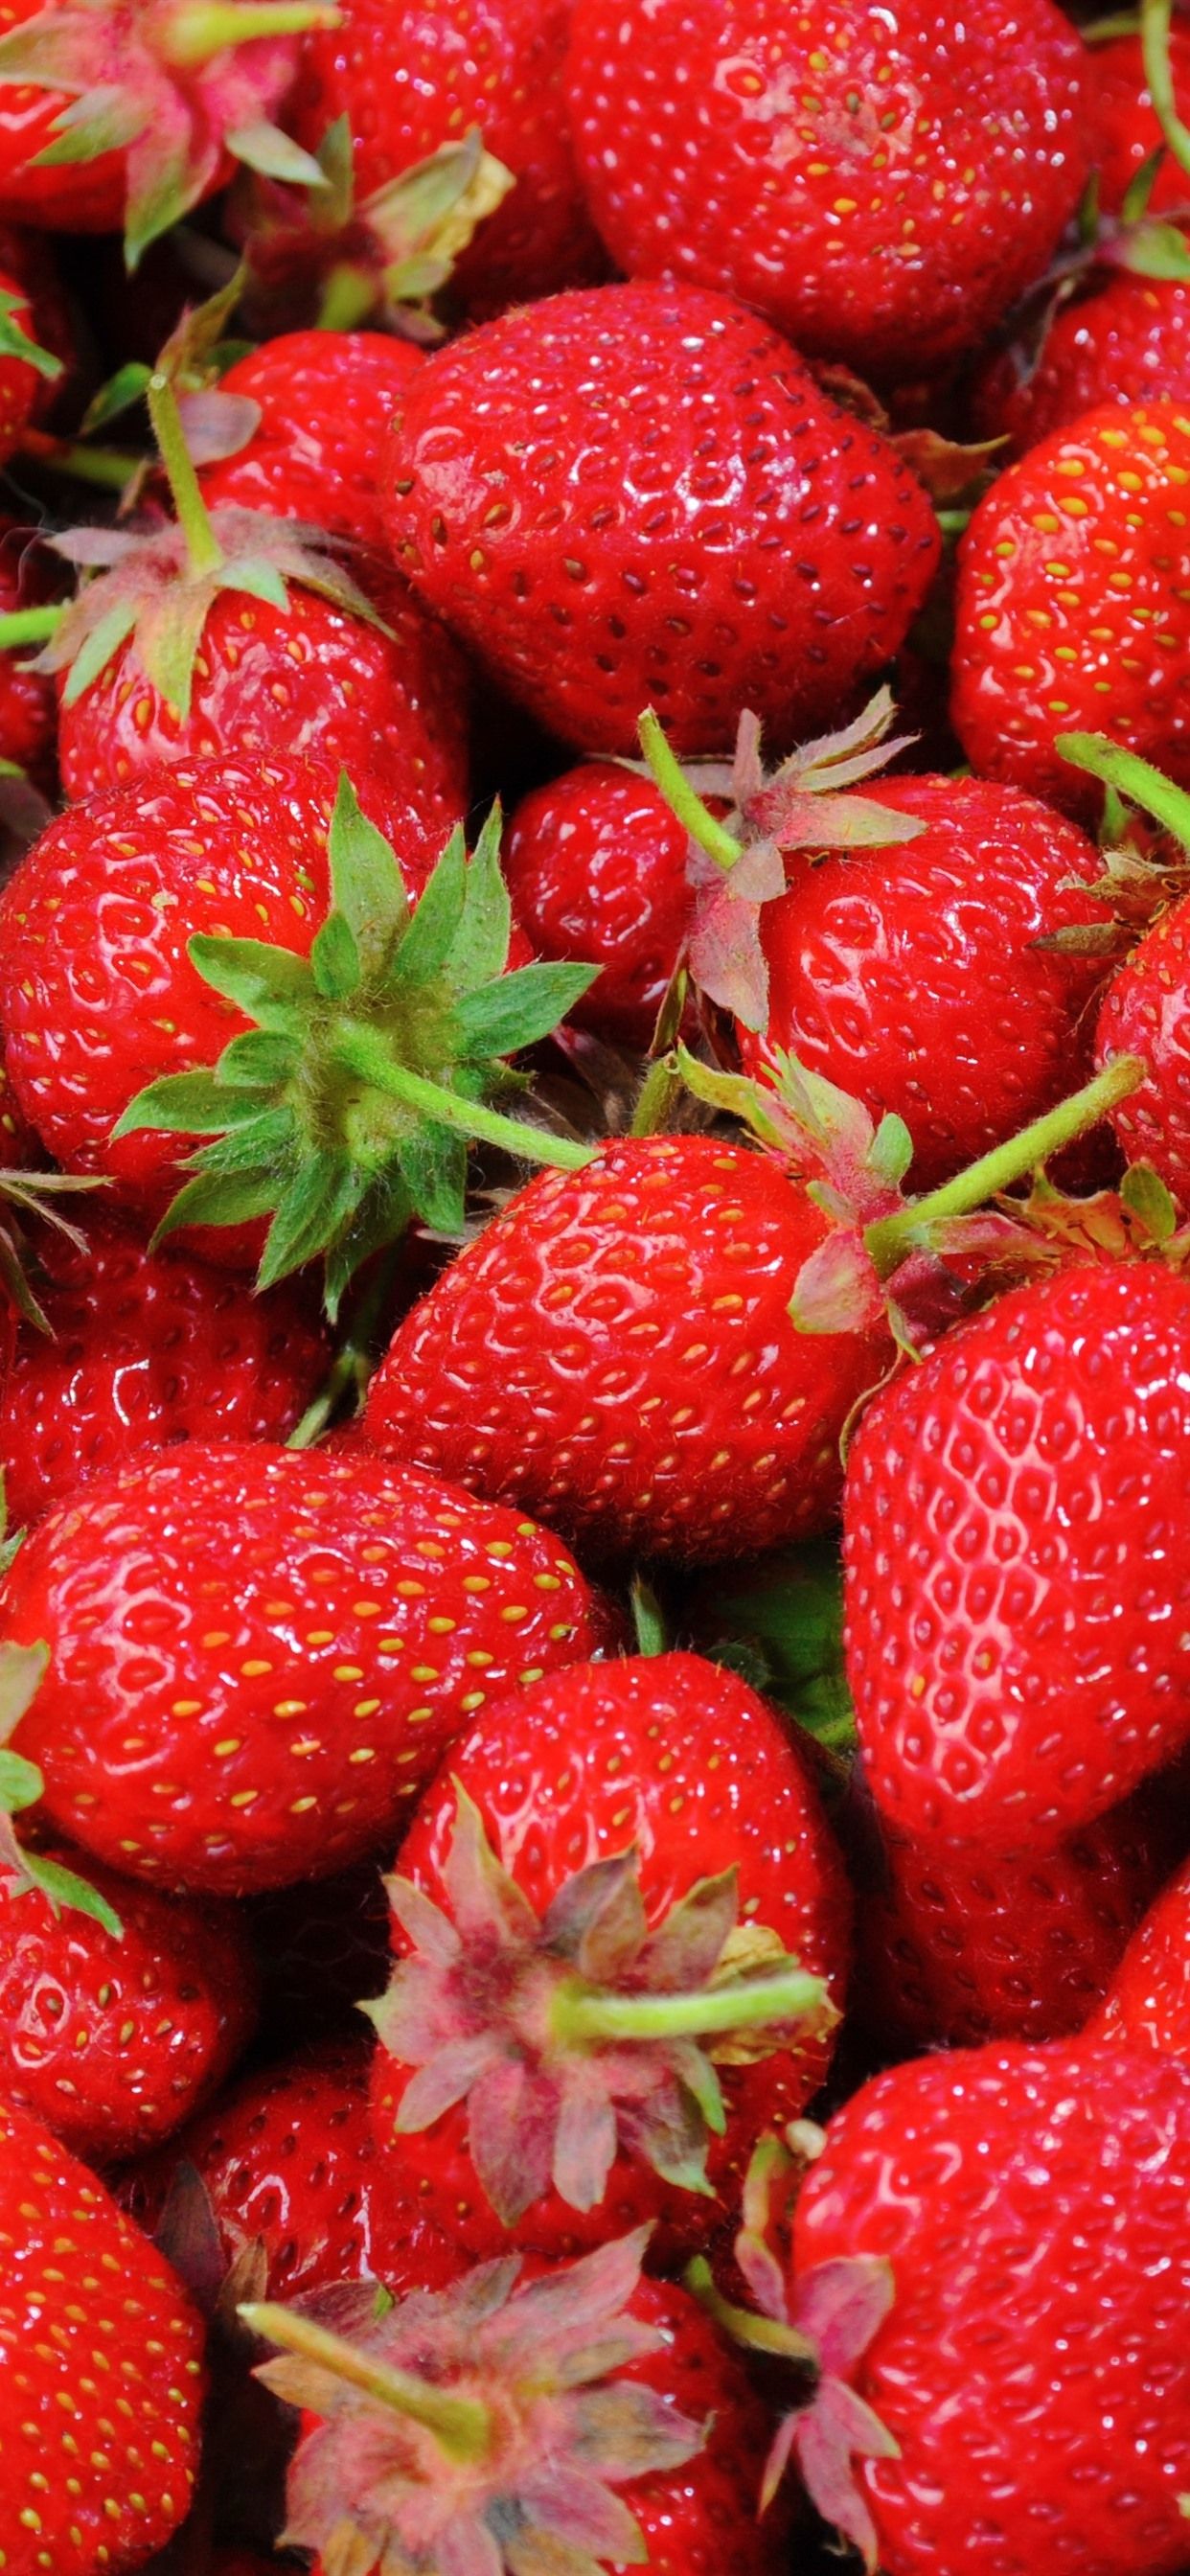 Many Delicious Strawberries, Fruit 1242x2688 IPhone 11 Pro XS Max Wallpaper, Background, Picture, Image